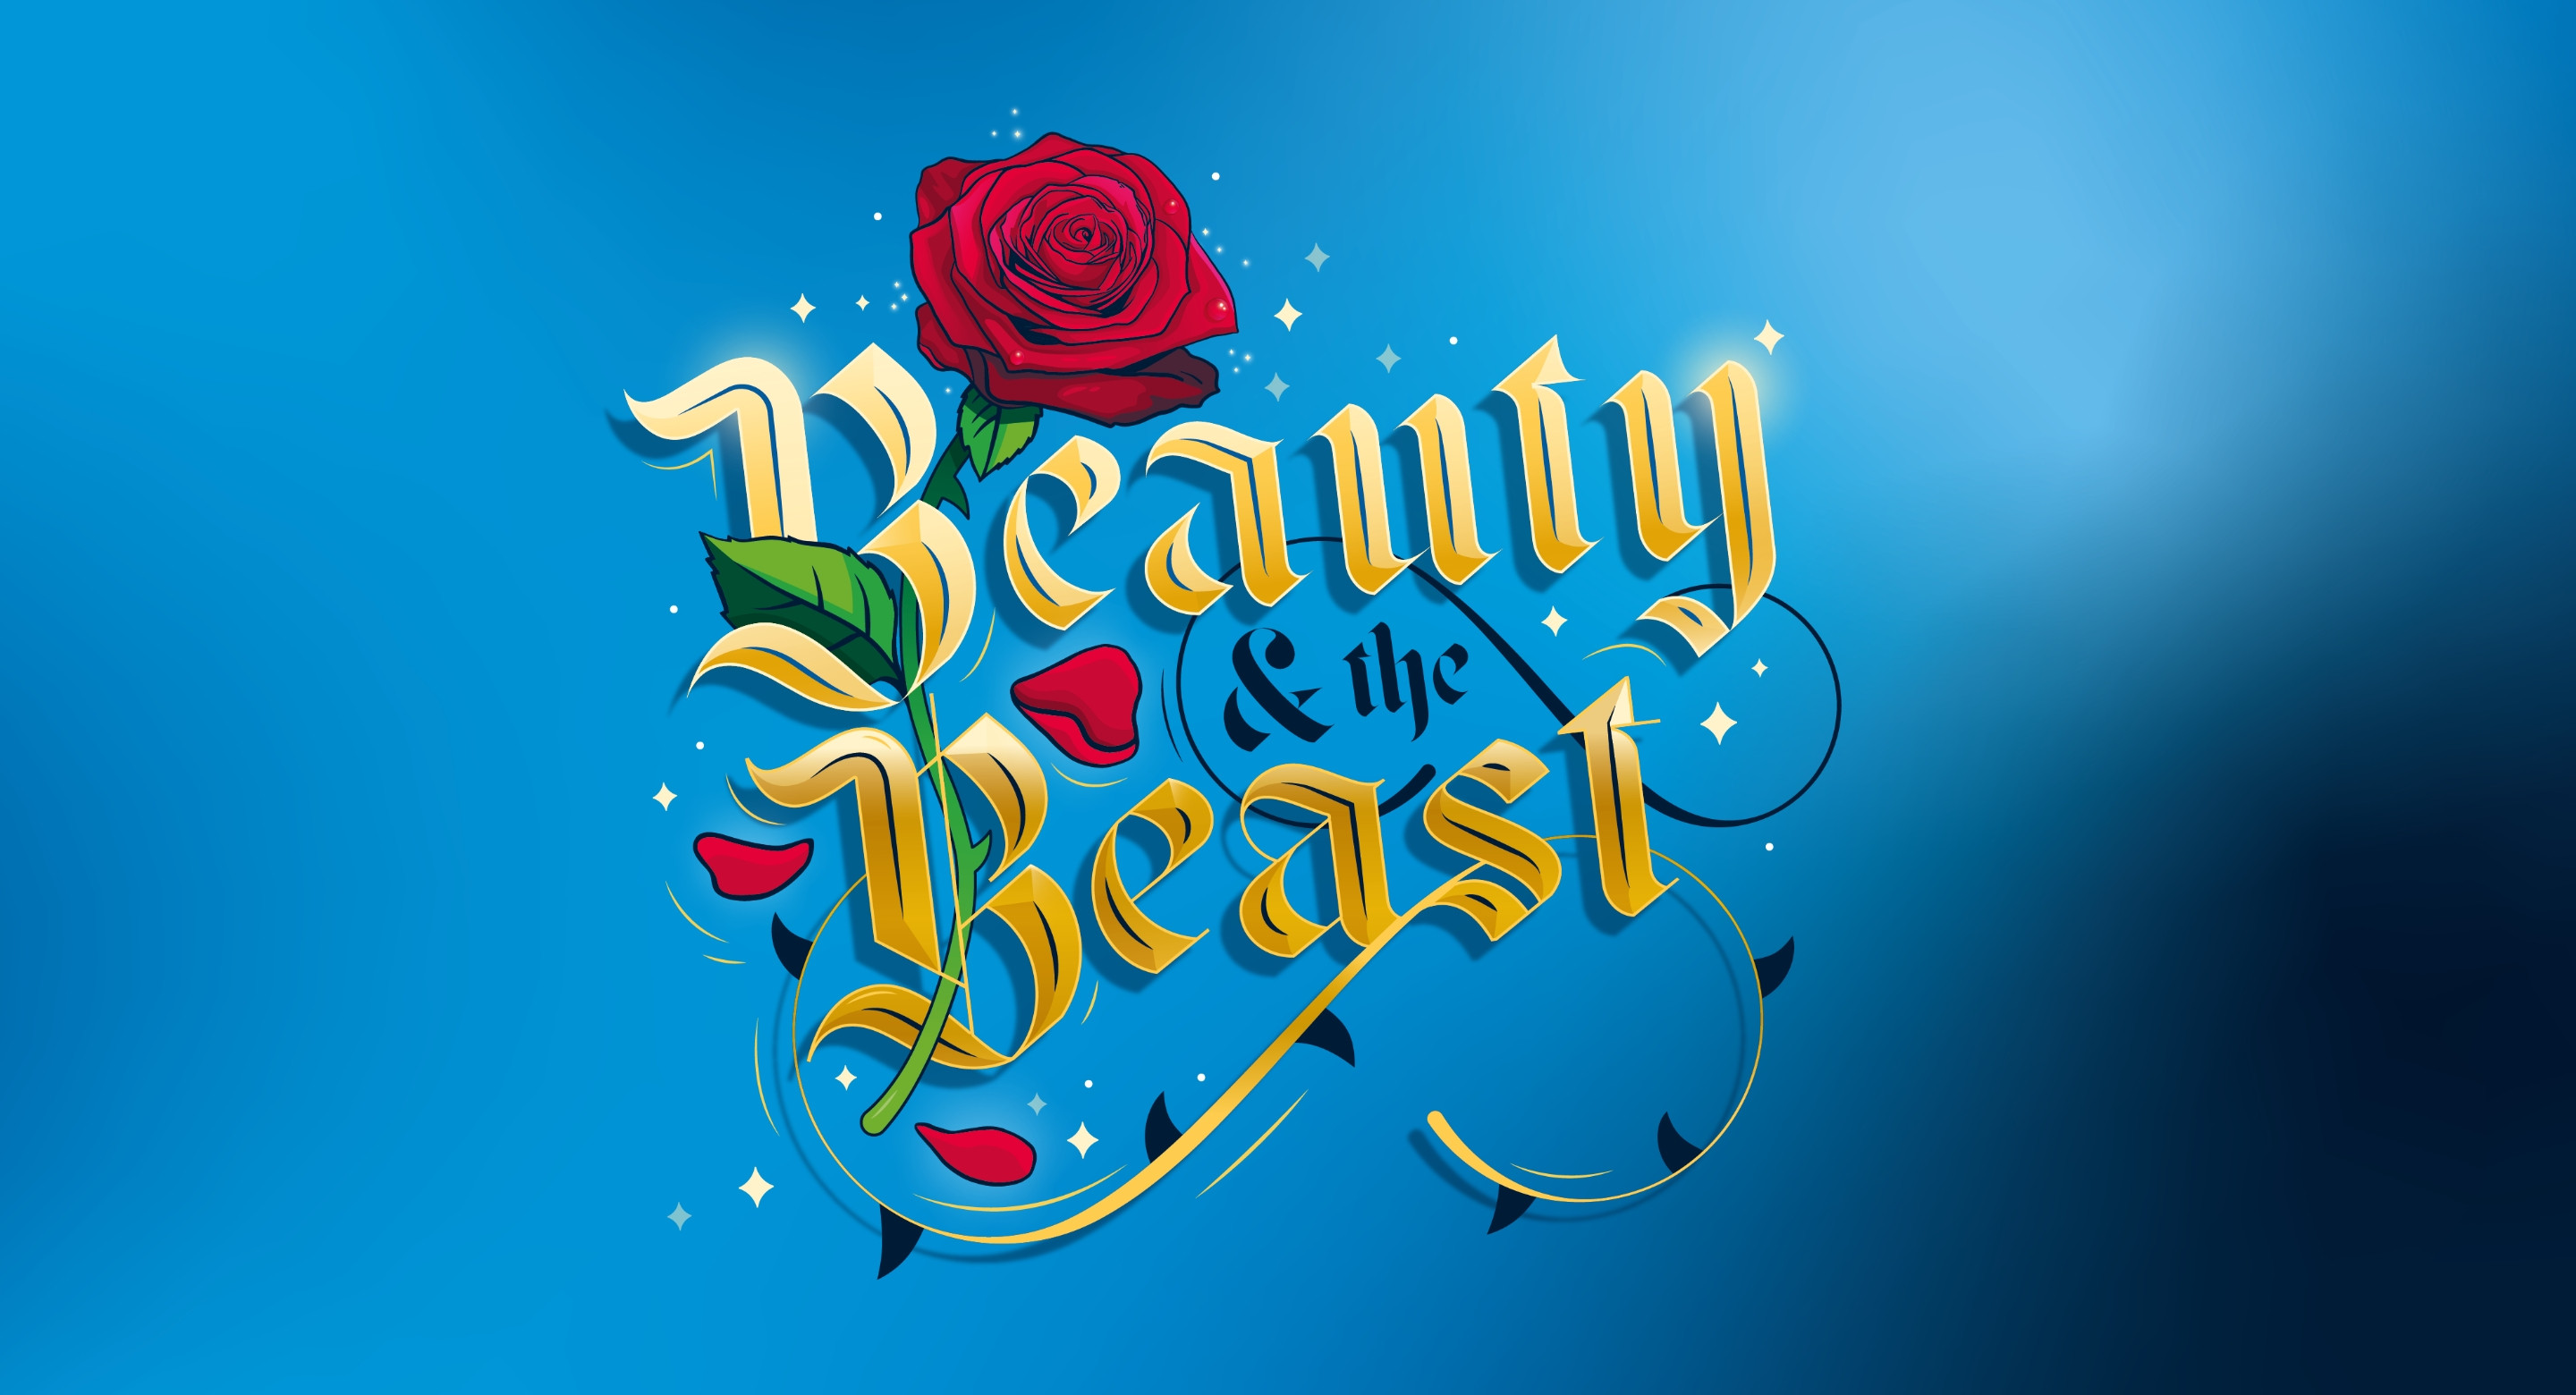 New Theatre Royal Beauty & the Beast pantomime logo design brand